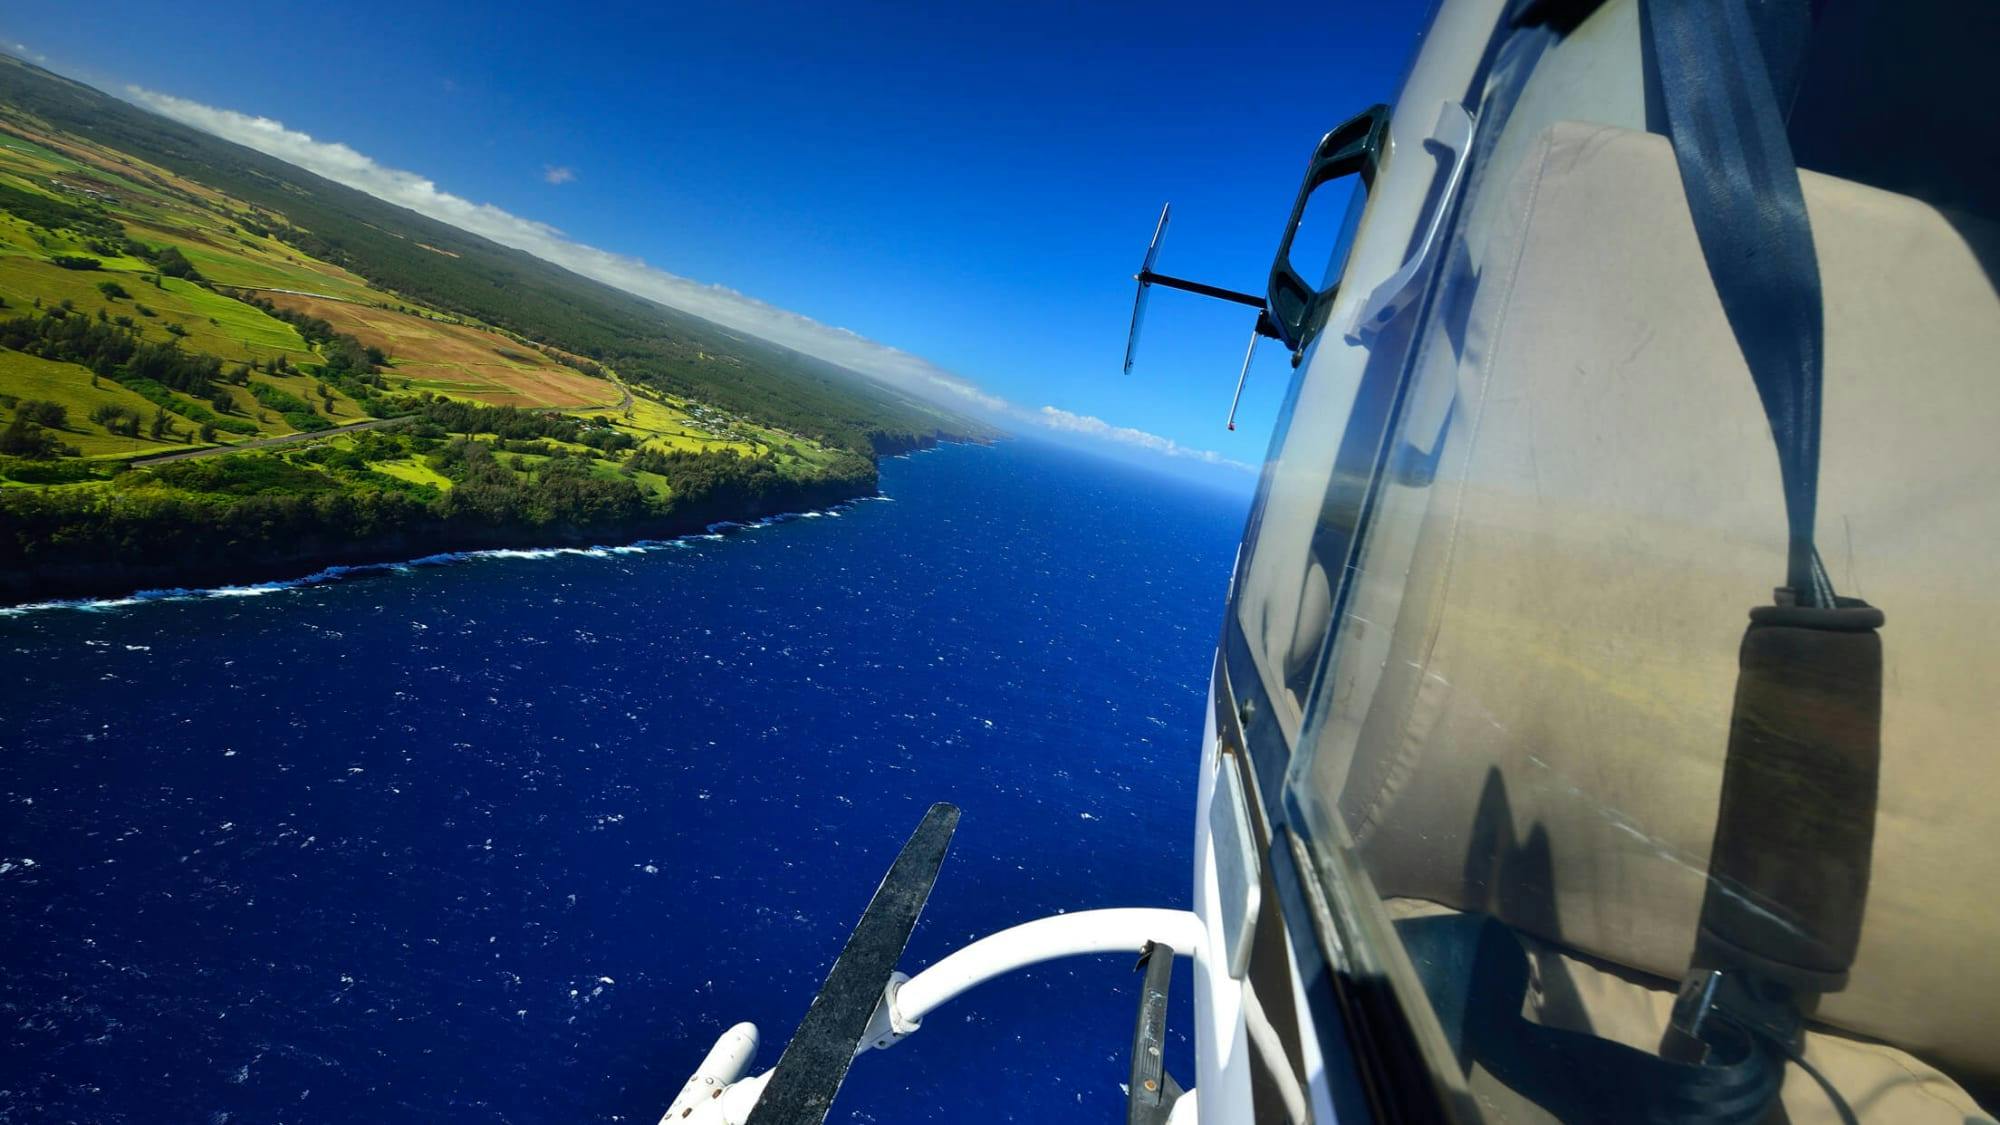 Kohala coast from the viewpoint of a tour passenger 